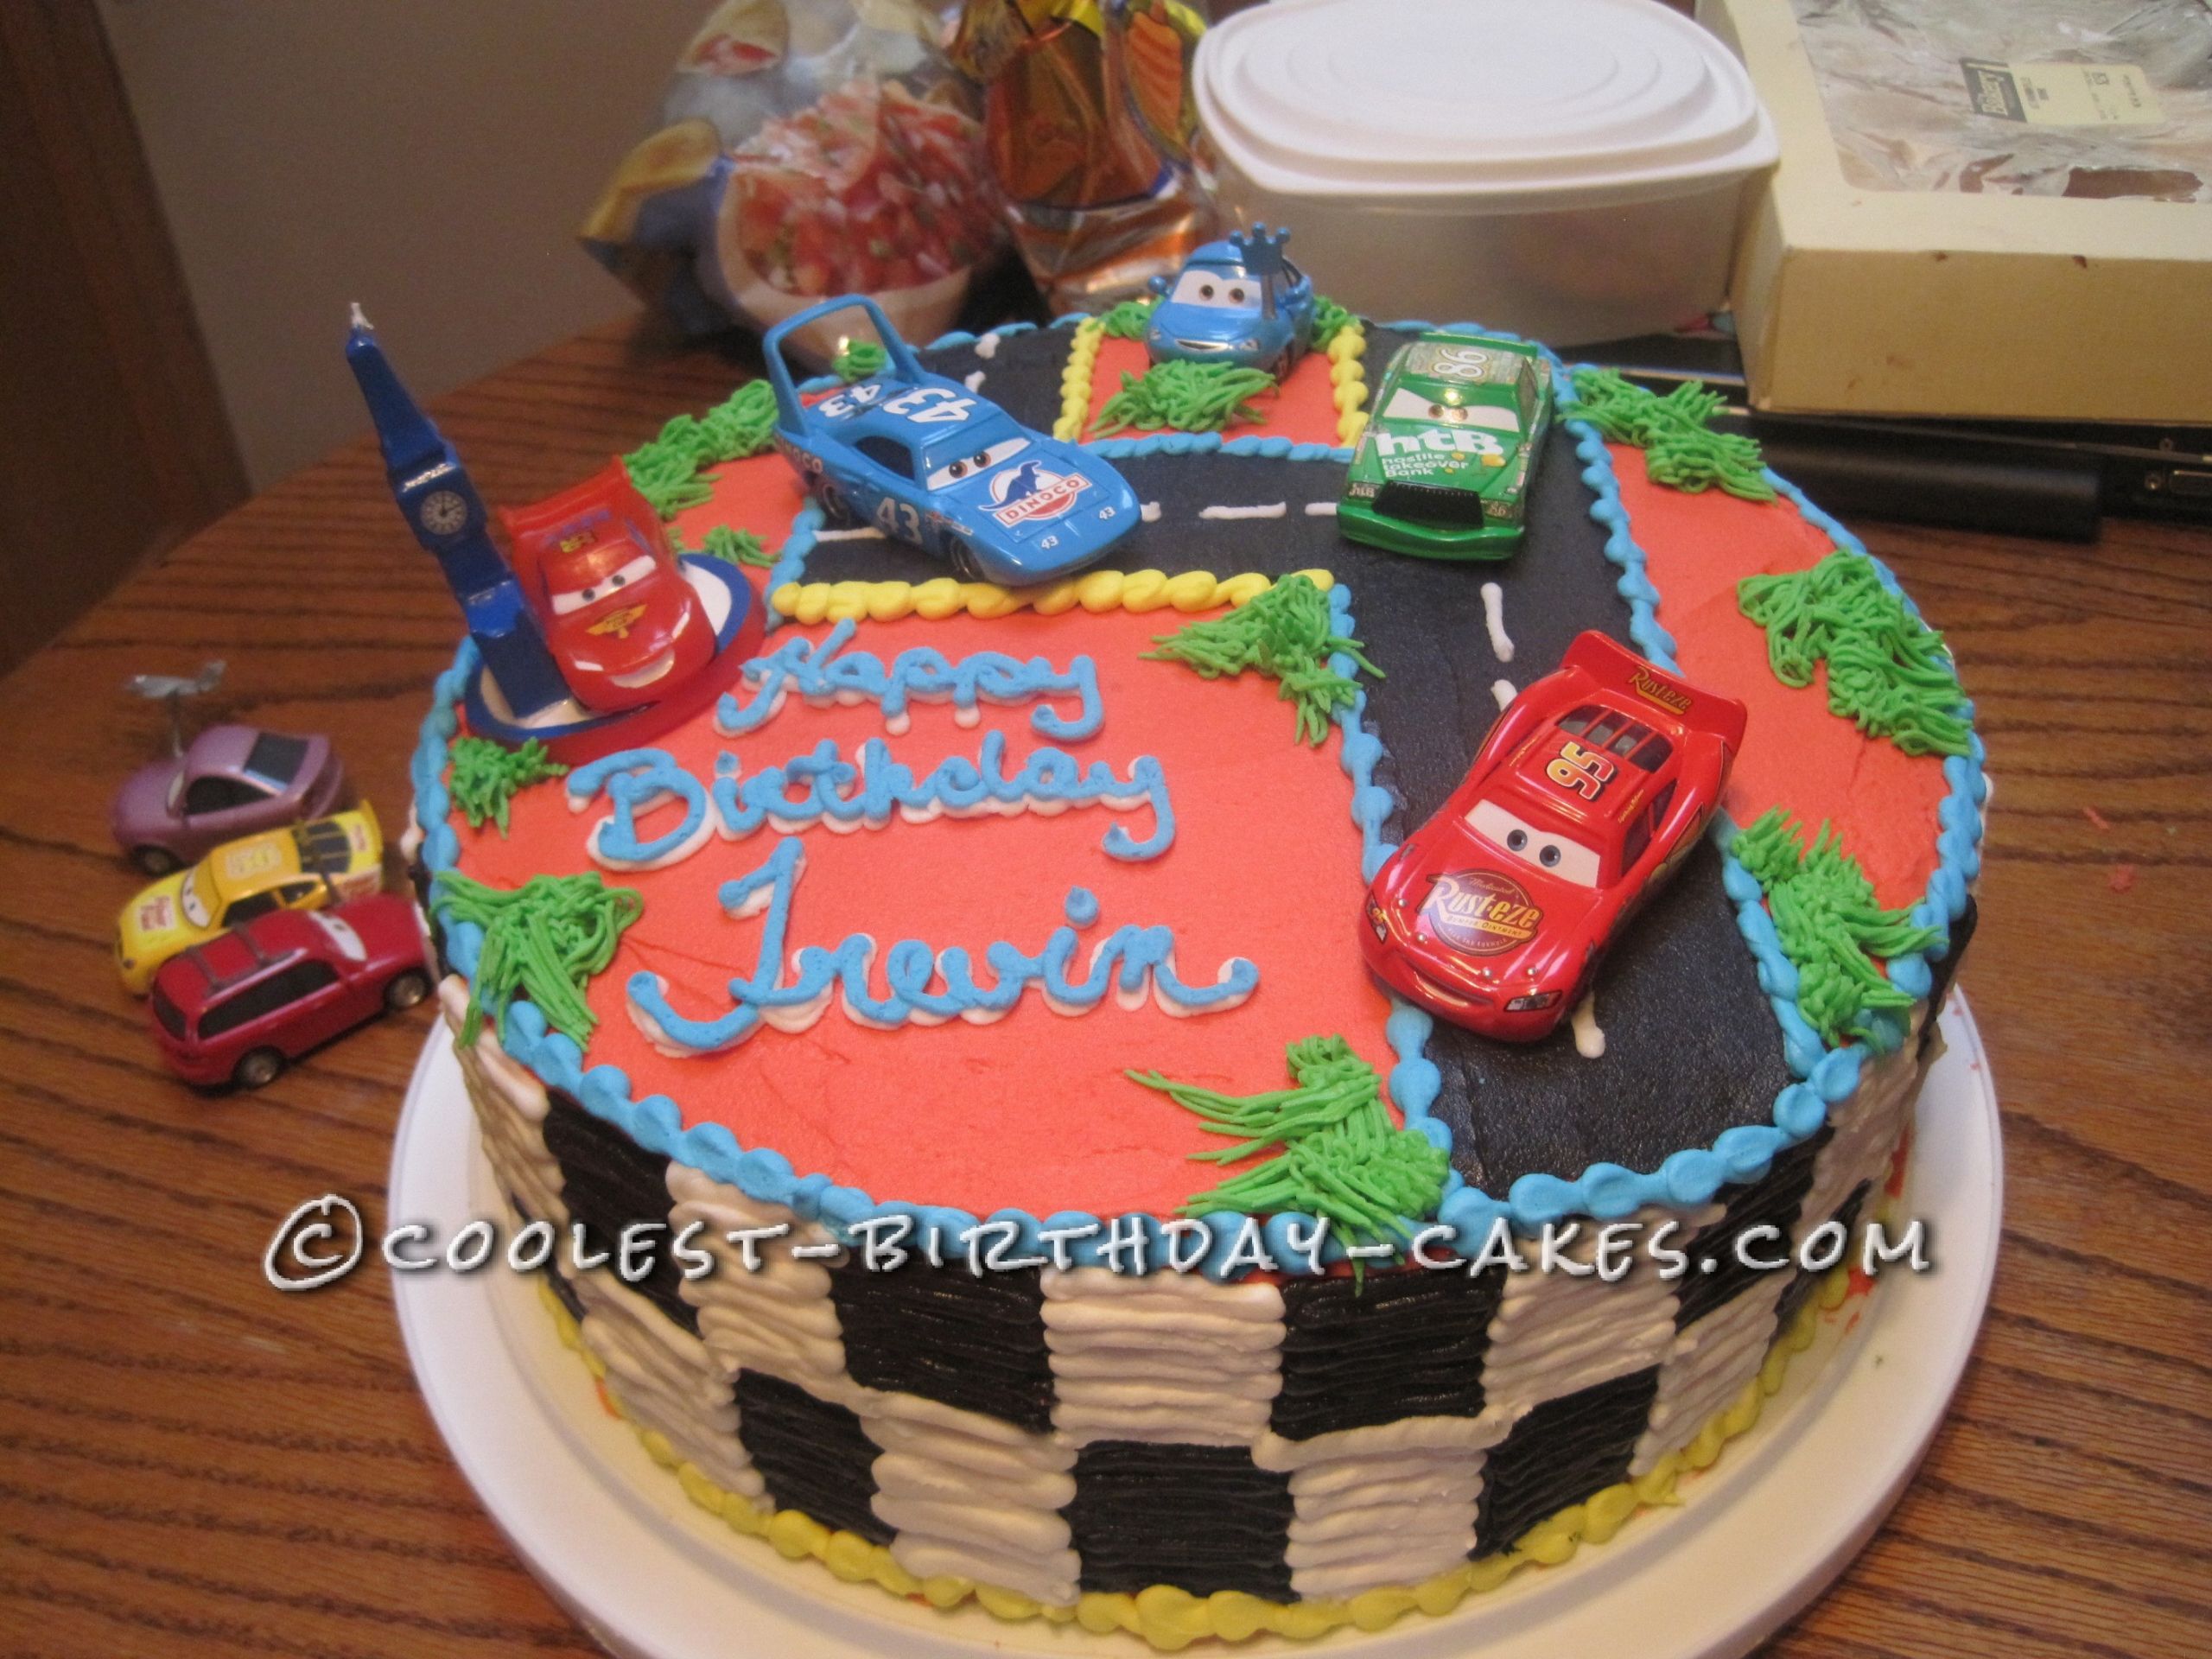 Coolest-birthday-cakes.com
 Cool Homemade Cars Birthday Cake with Toy Car Toppers